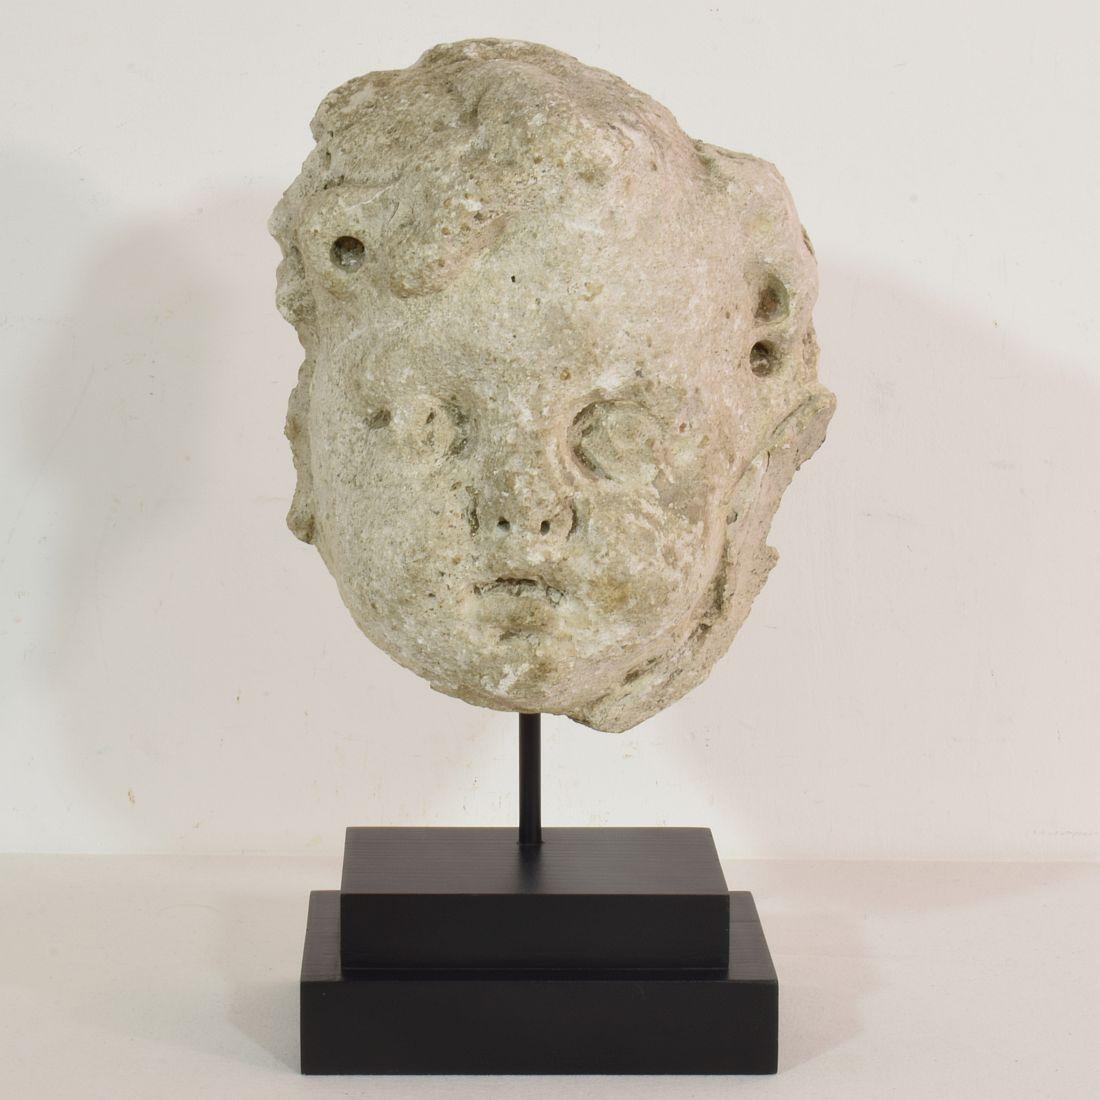 Amazing piece. Stucco/stone paste fragment of an angel head that once adorned a facade. Extremely weathered but still beautiful expression. Placed on a wooden base. France circa 1650/1750. Weathered and losses.
Measurement below is inclusive the